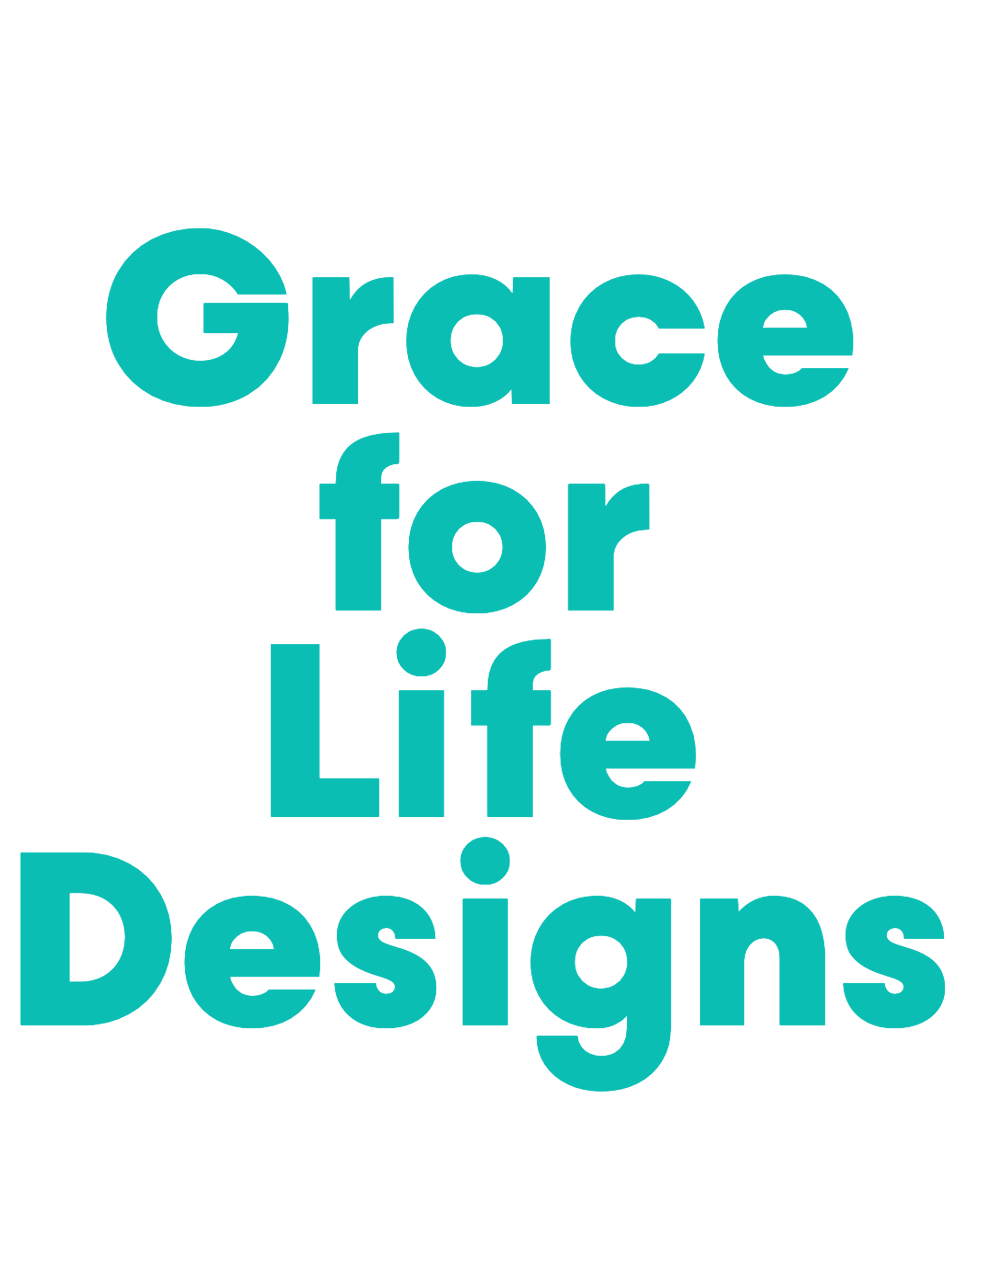 Grace for Life Designs